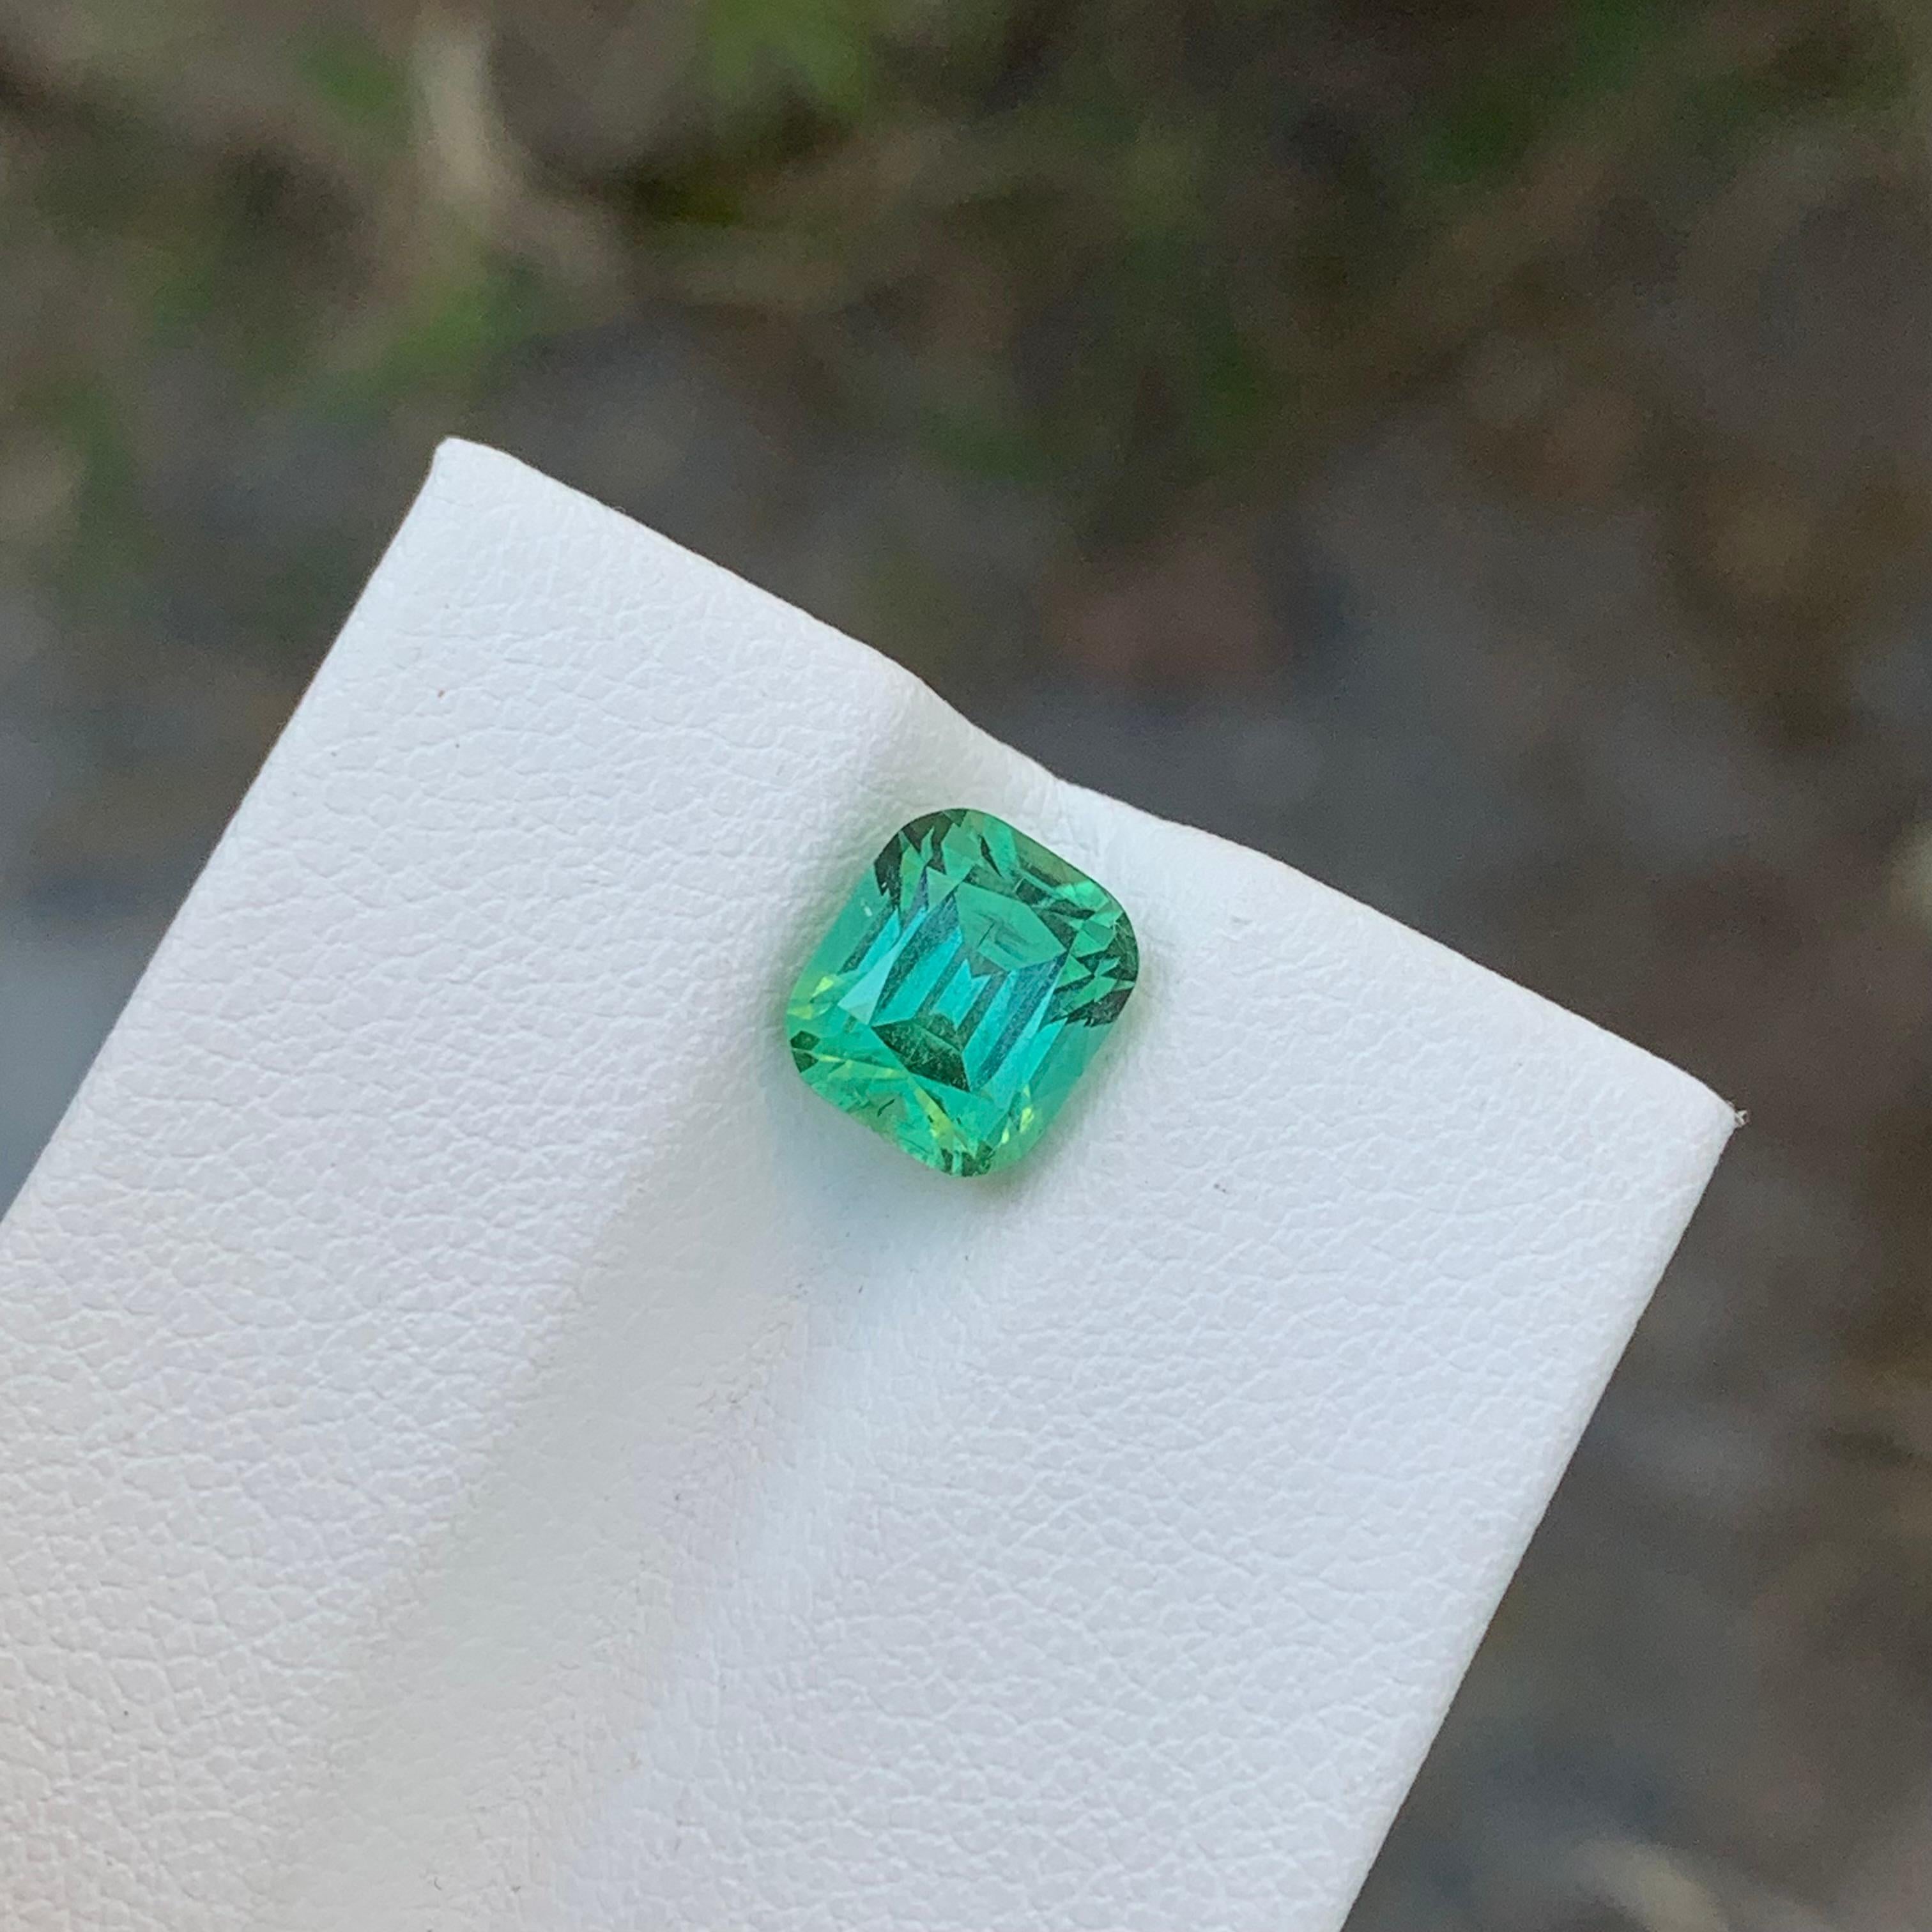 Loose Mint Green Tourmaline

Weight: 2.50 Carats
Dimension: 7.1 x 6.6 x 6.1 Mm
Colour: Mint Green 
Origin: Afghanistan
Certificate: On Demand
Treatment: Non

Tourmaline is a captivating gemstone known for its remarkable variety of colors, making it